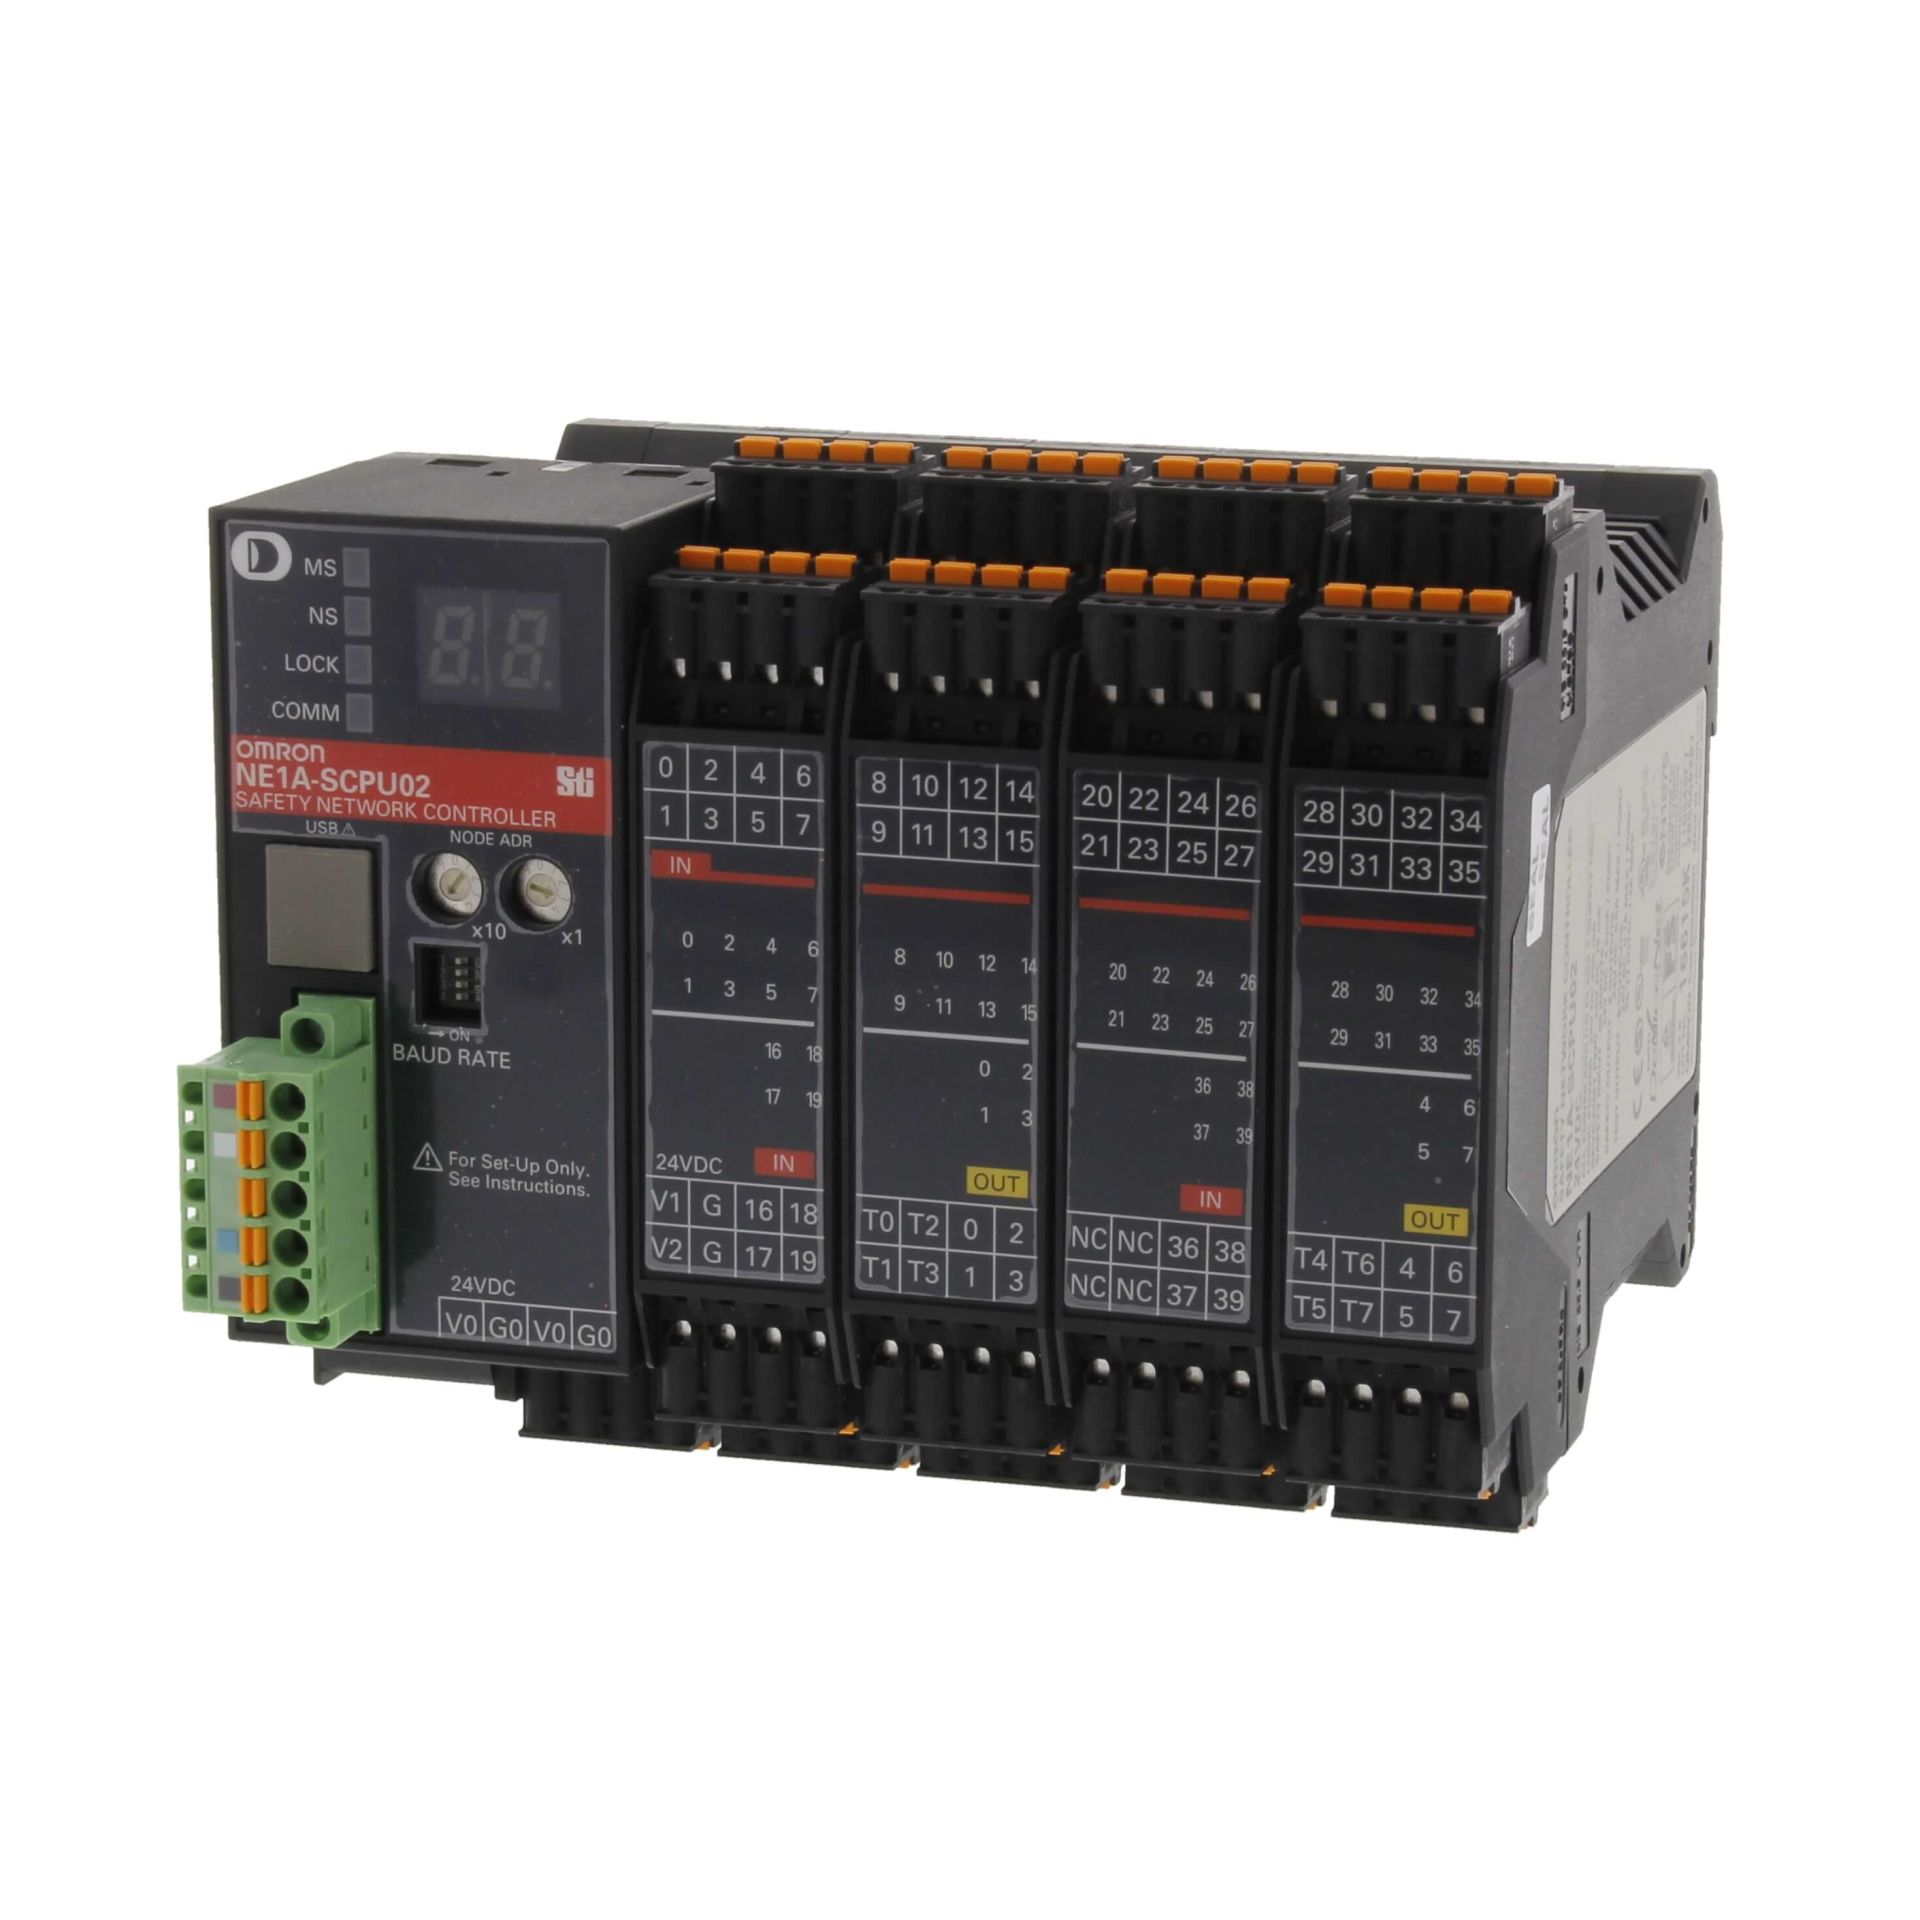 Omron - NE1A-SCPU02 VER2.0  Safety network controller, 40 x PNP inputs, 8x PNP outputs, 8x test outputs